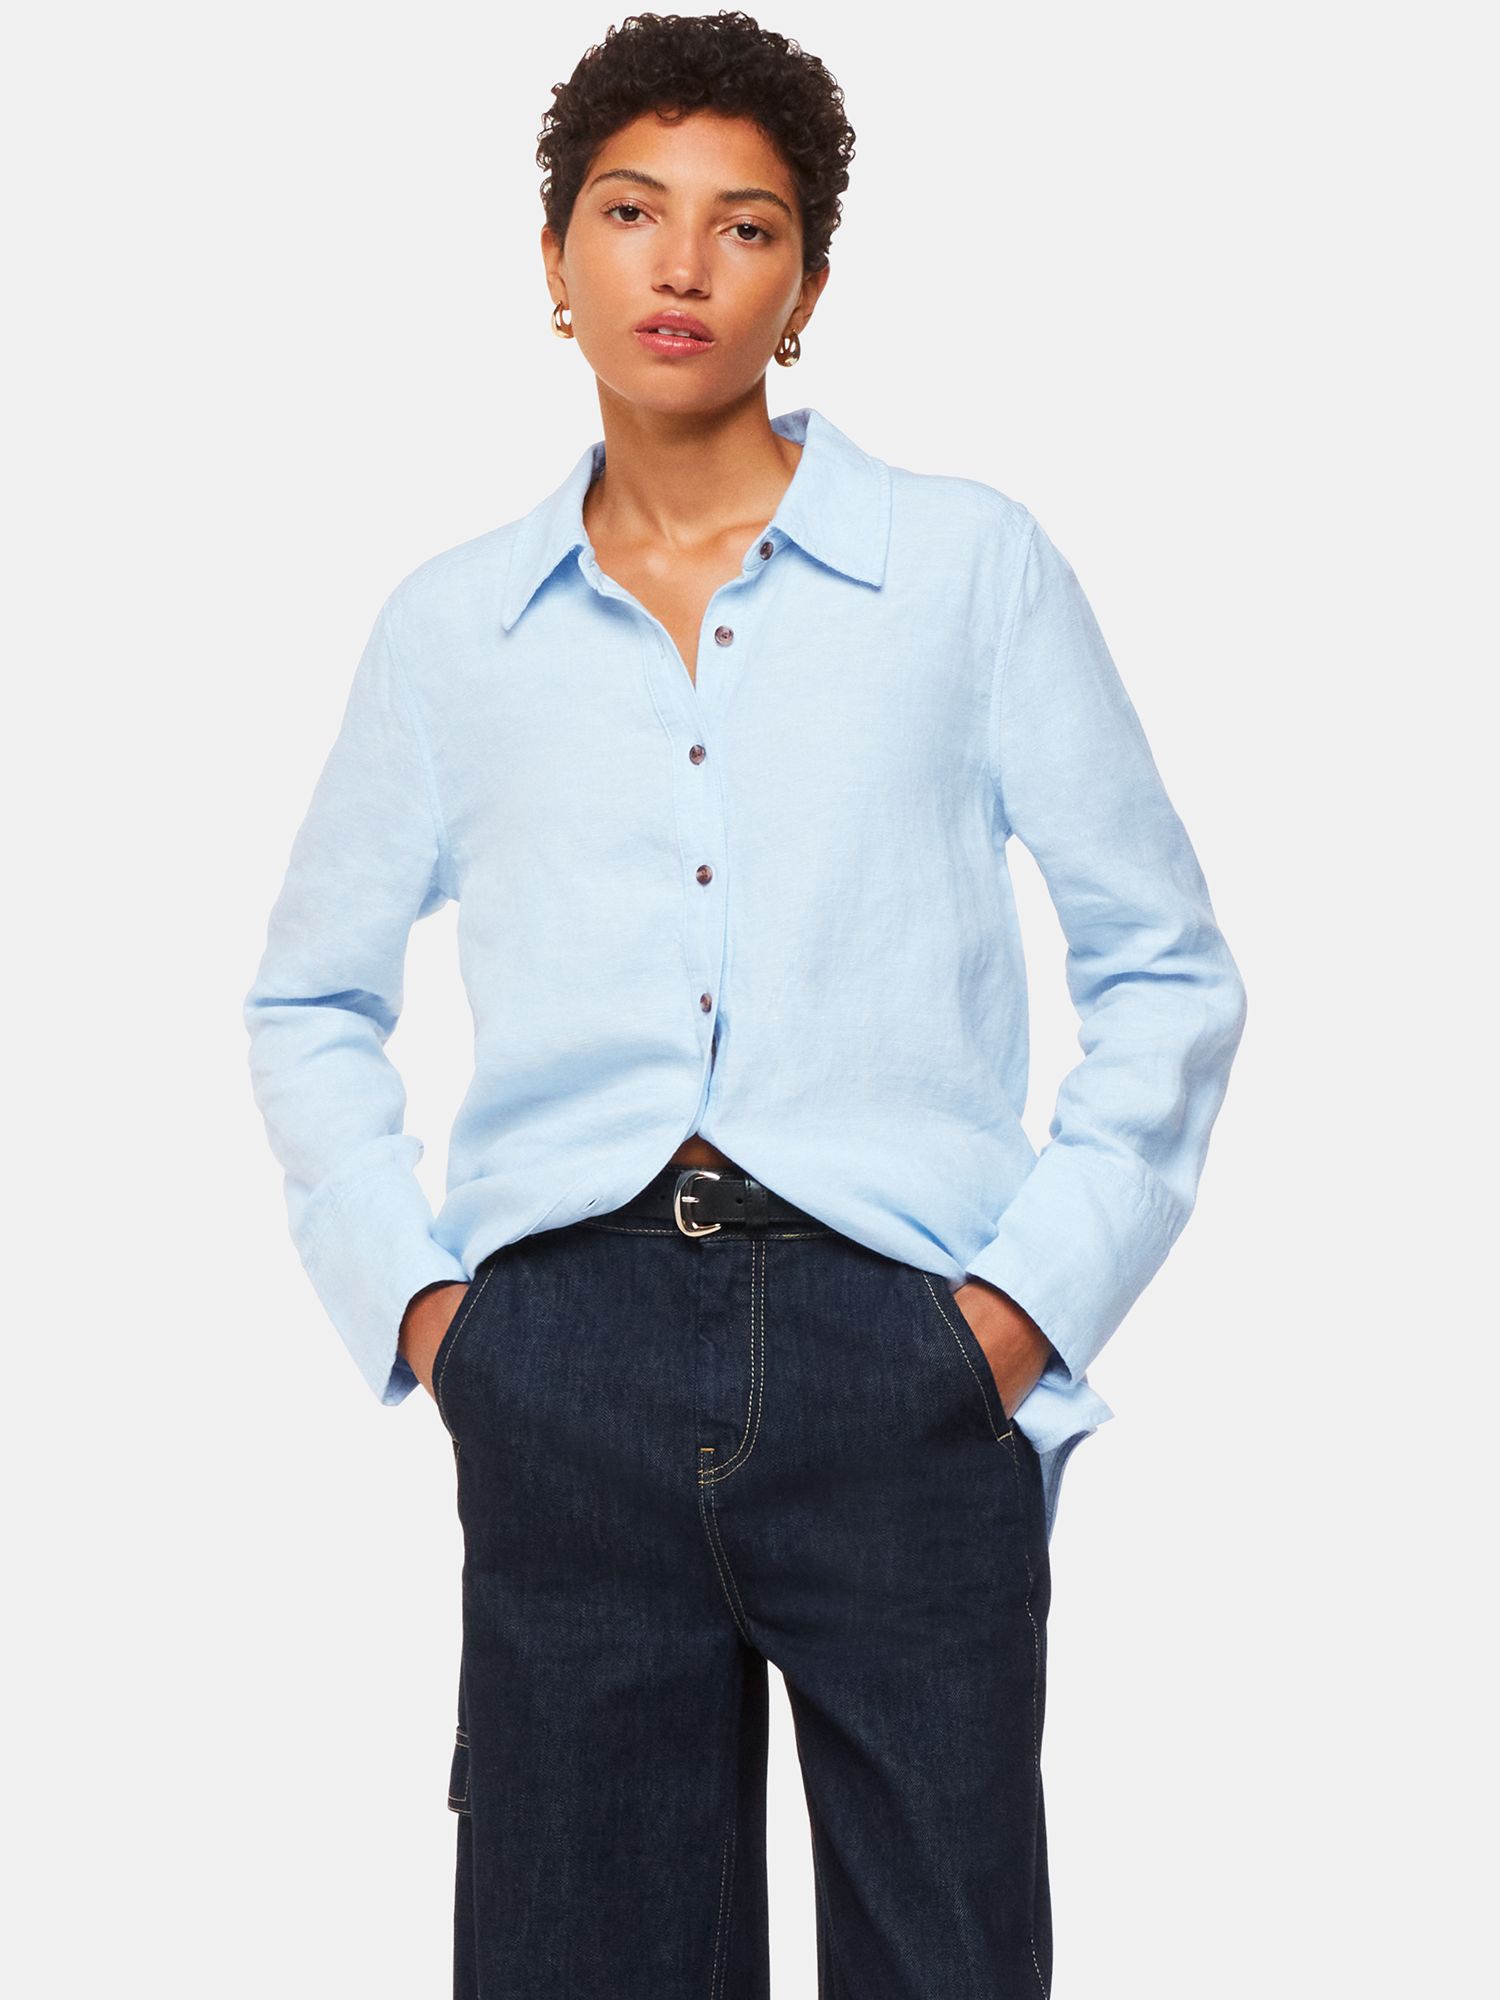 Whistles Relaxed Fit Linen Shirt, Blue, 10